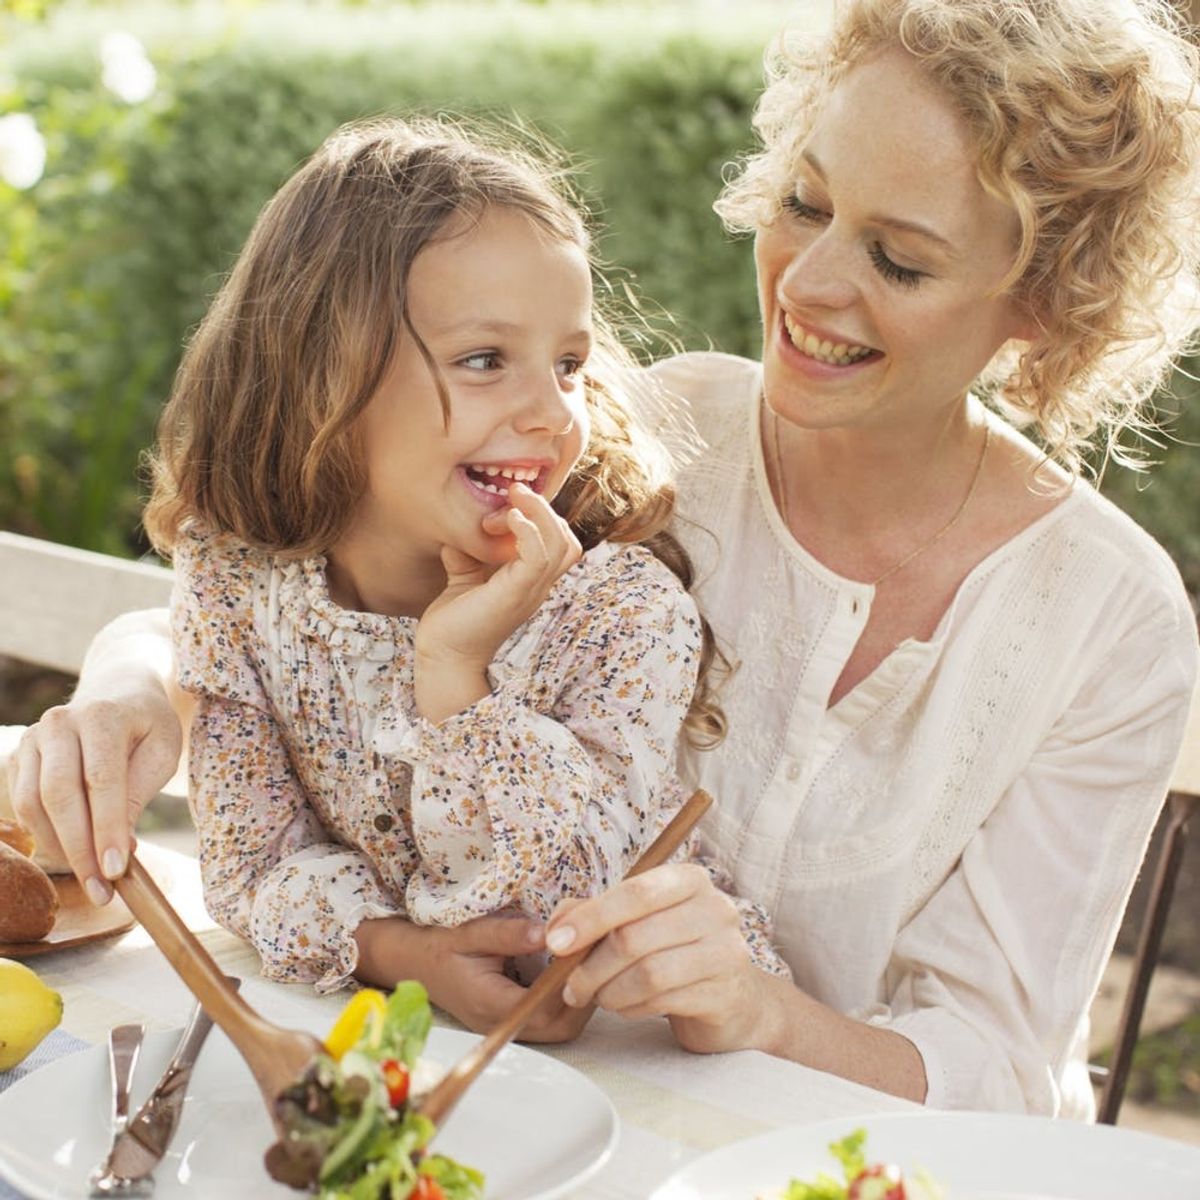 7 Easy Meal Ideas for Busy Moms